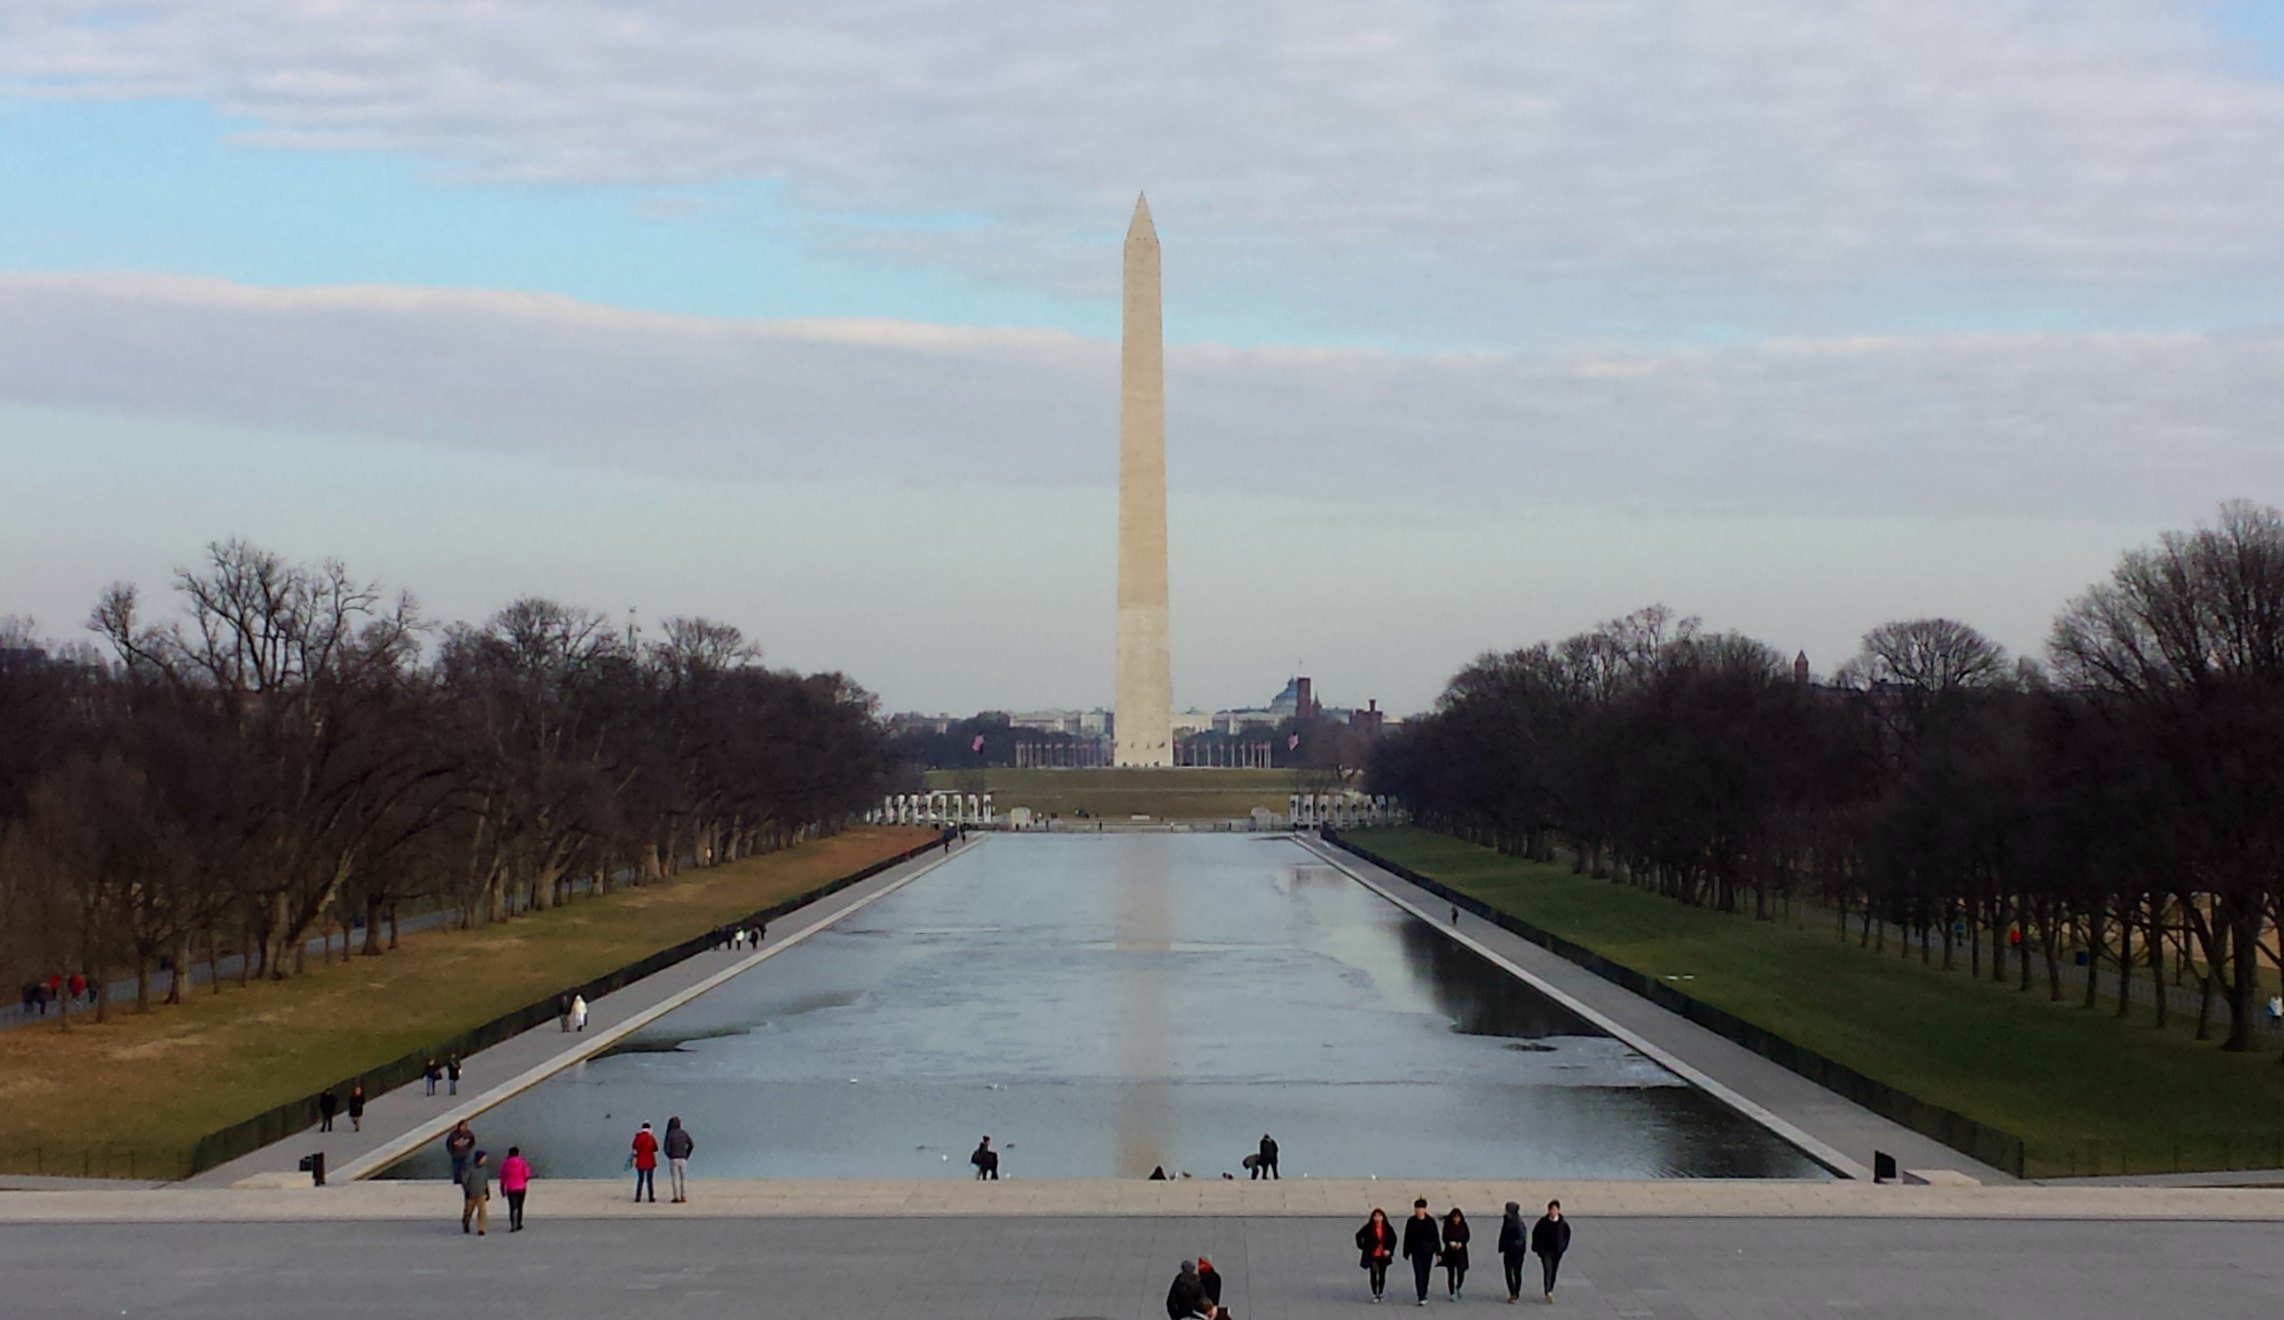 The Washington Monument over the Reflecting Pool in the National Mall, Washington DC